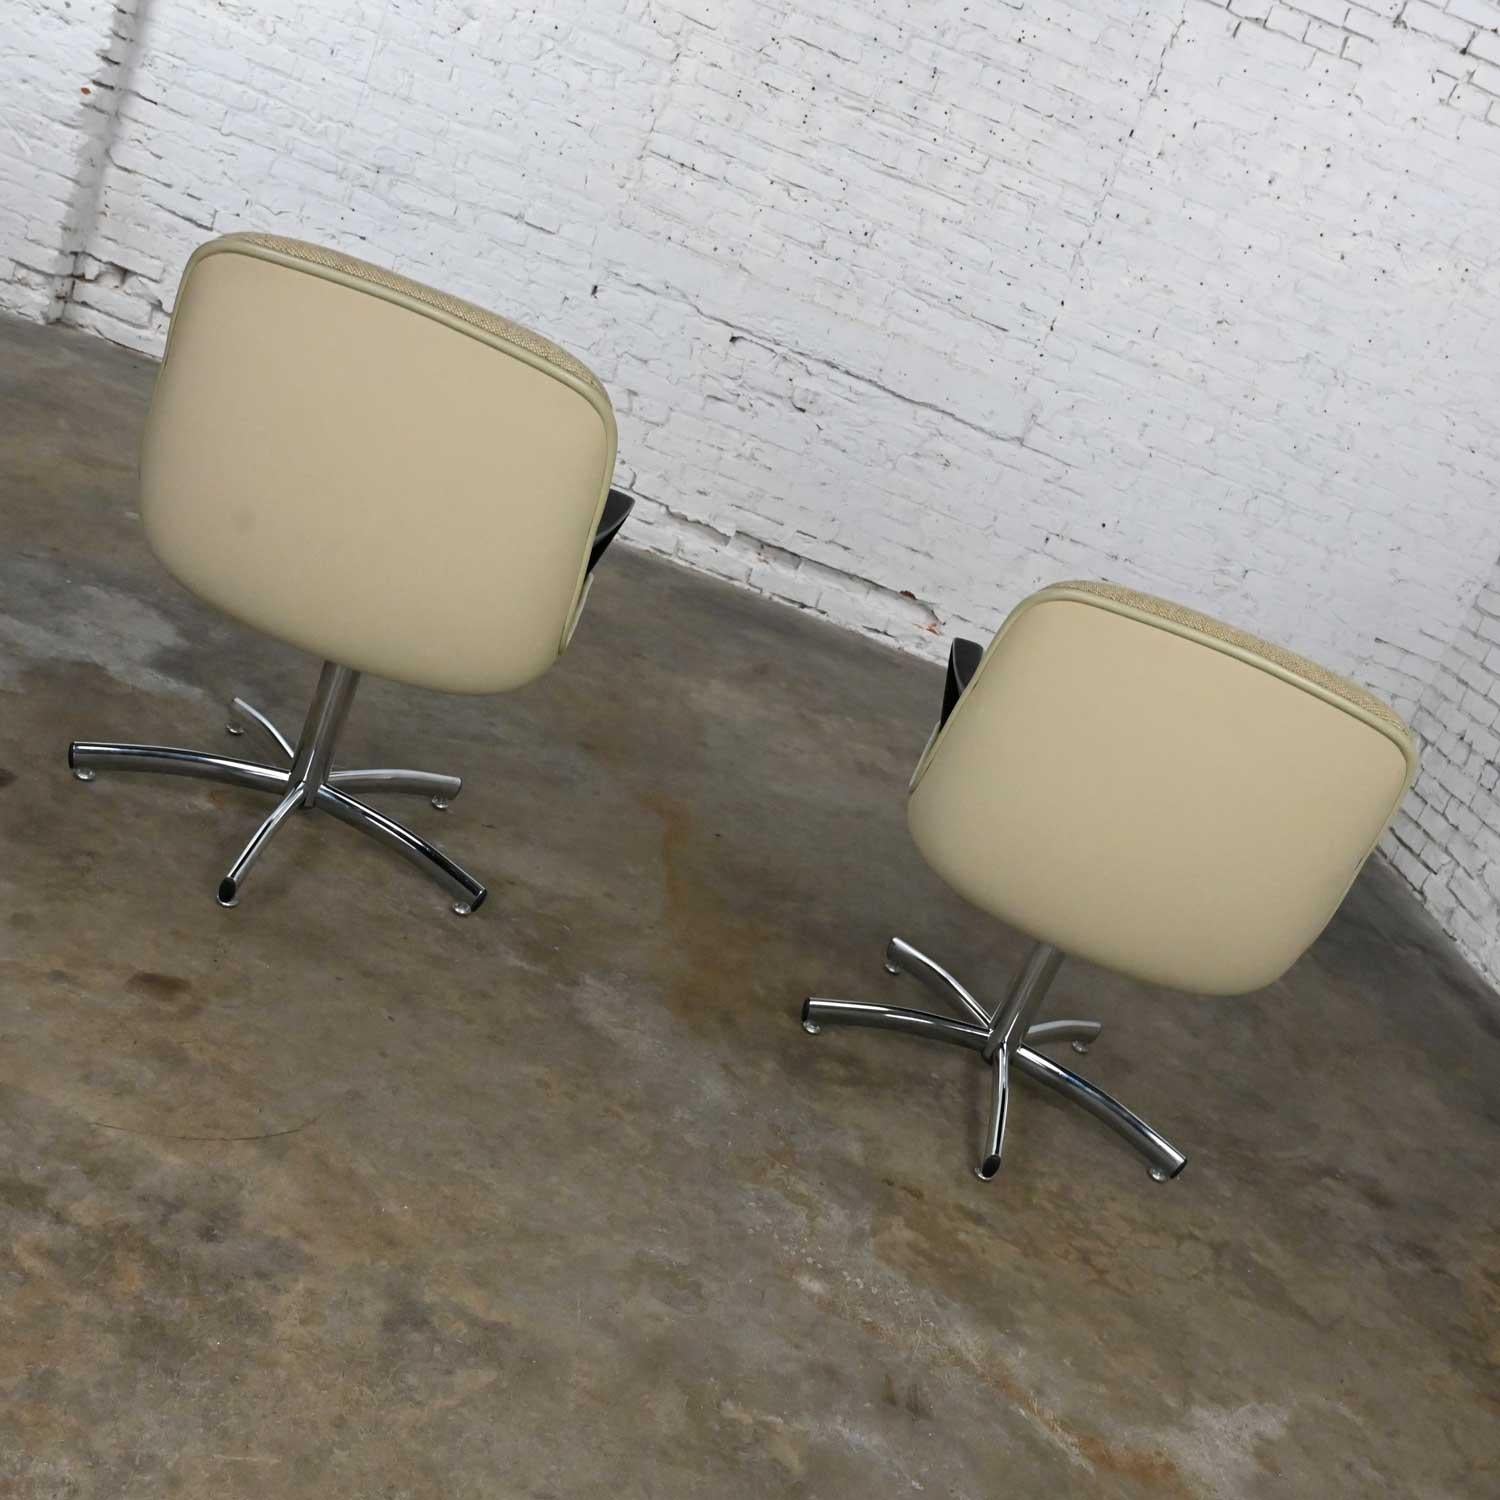 20th Century Modern Steelcase #451 5 Prong Chrome Base Office Chairs Style Charles Pollock Pr